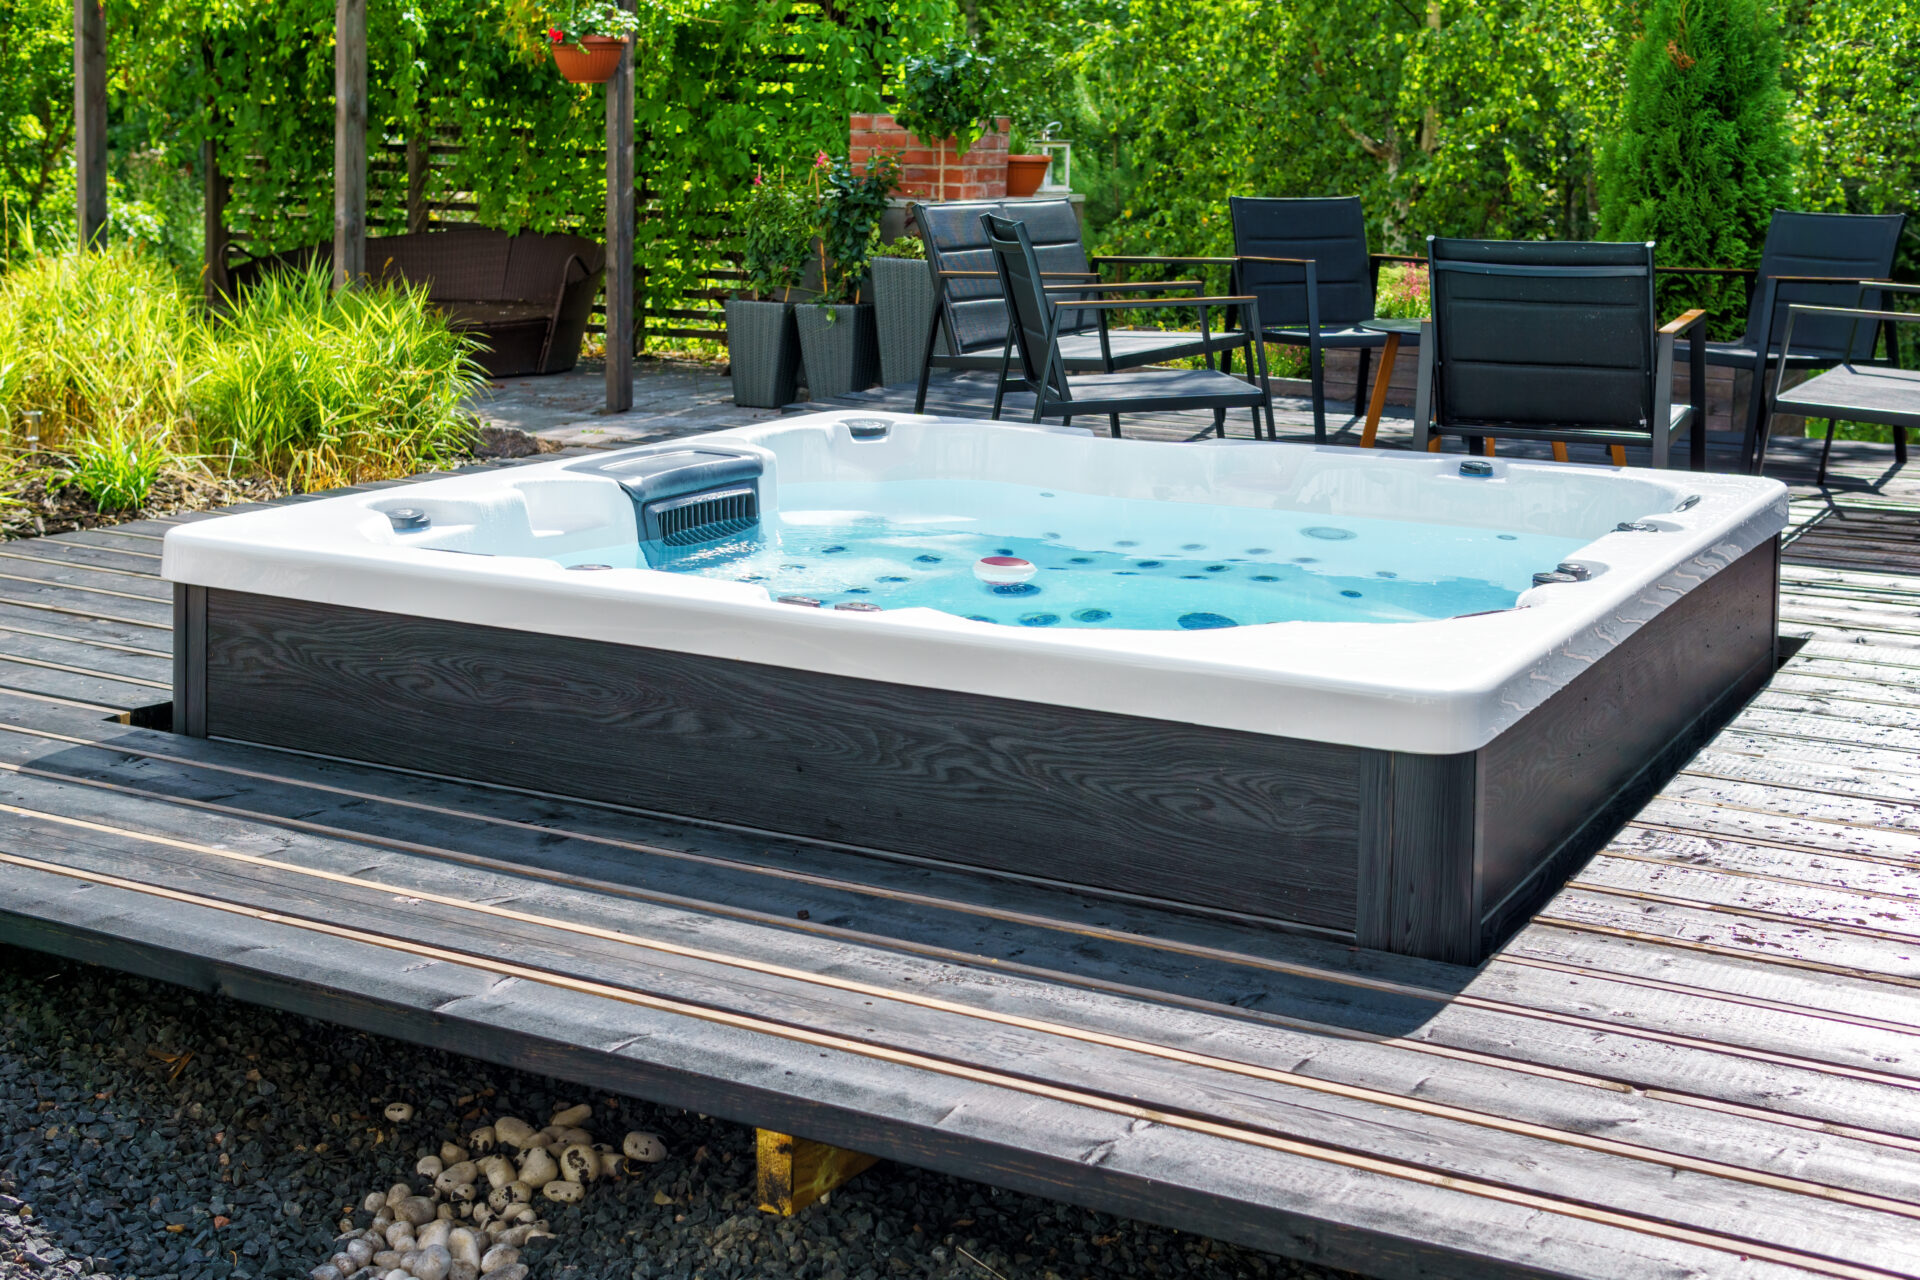 Large hot tub embedded in the backyard terrace. A sunny summer's